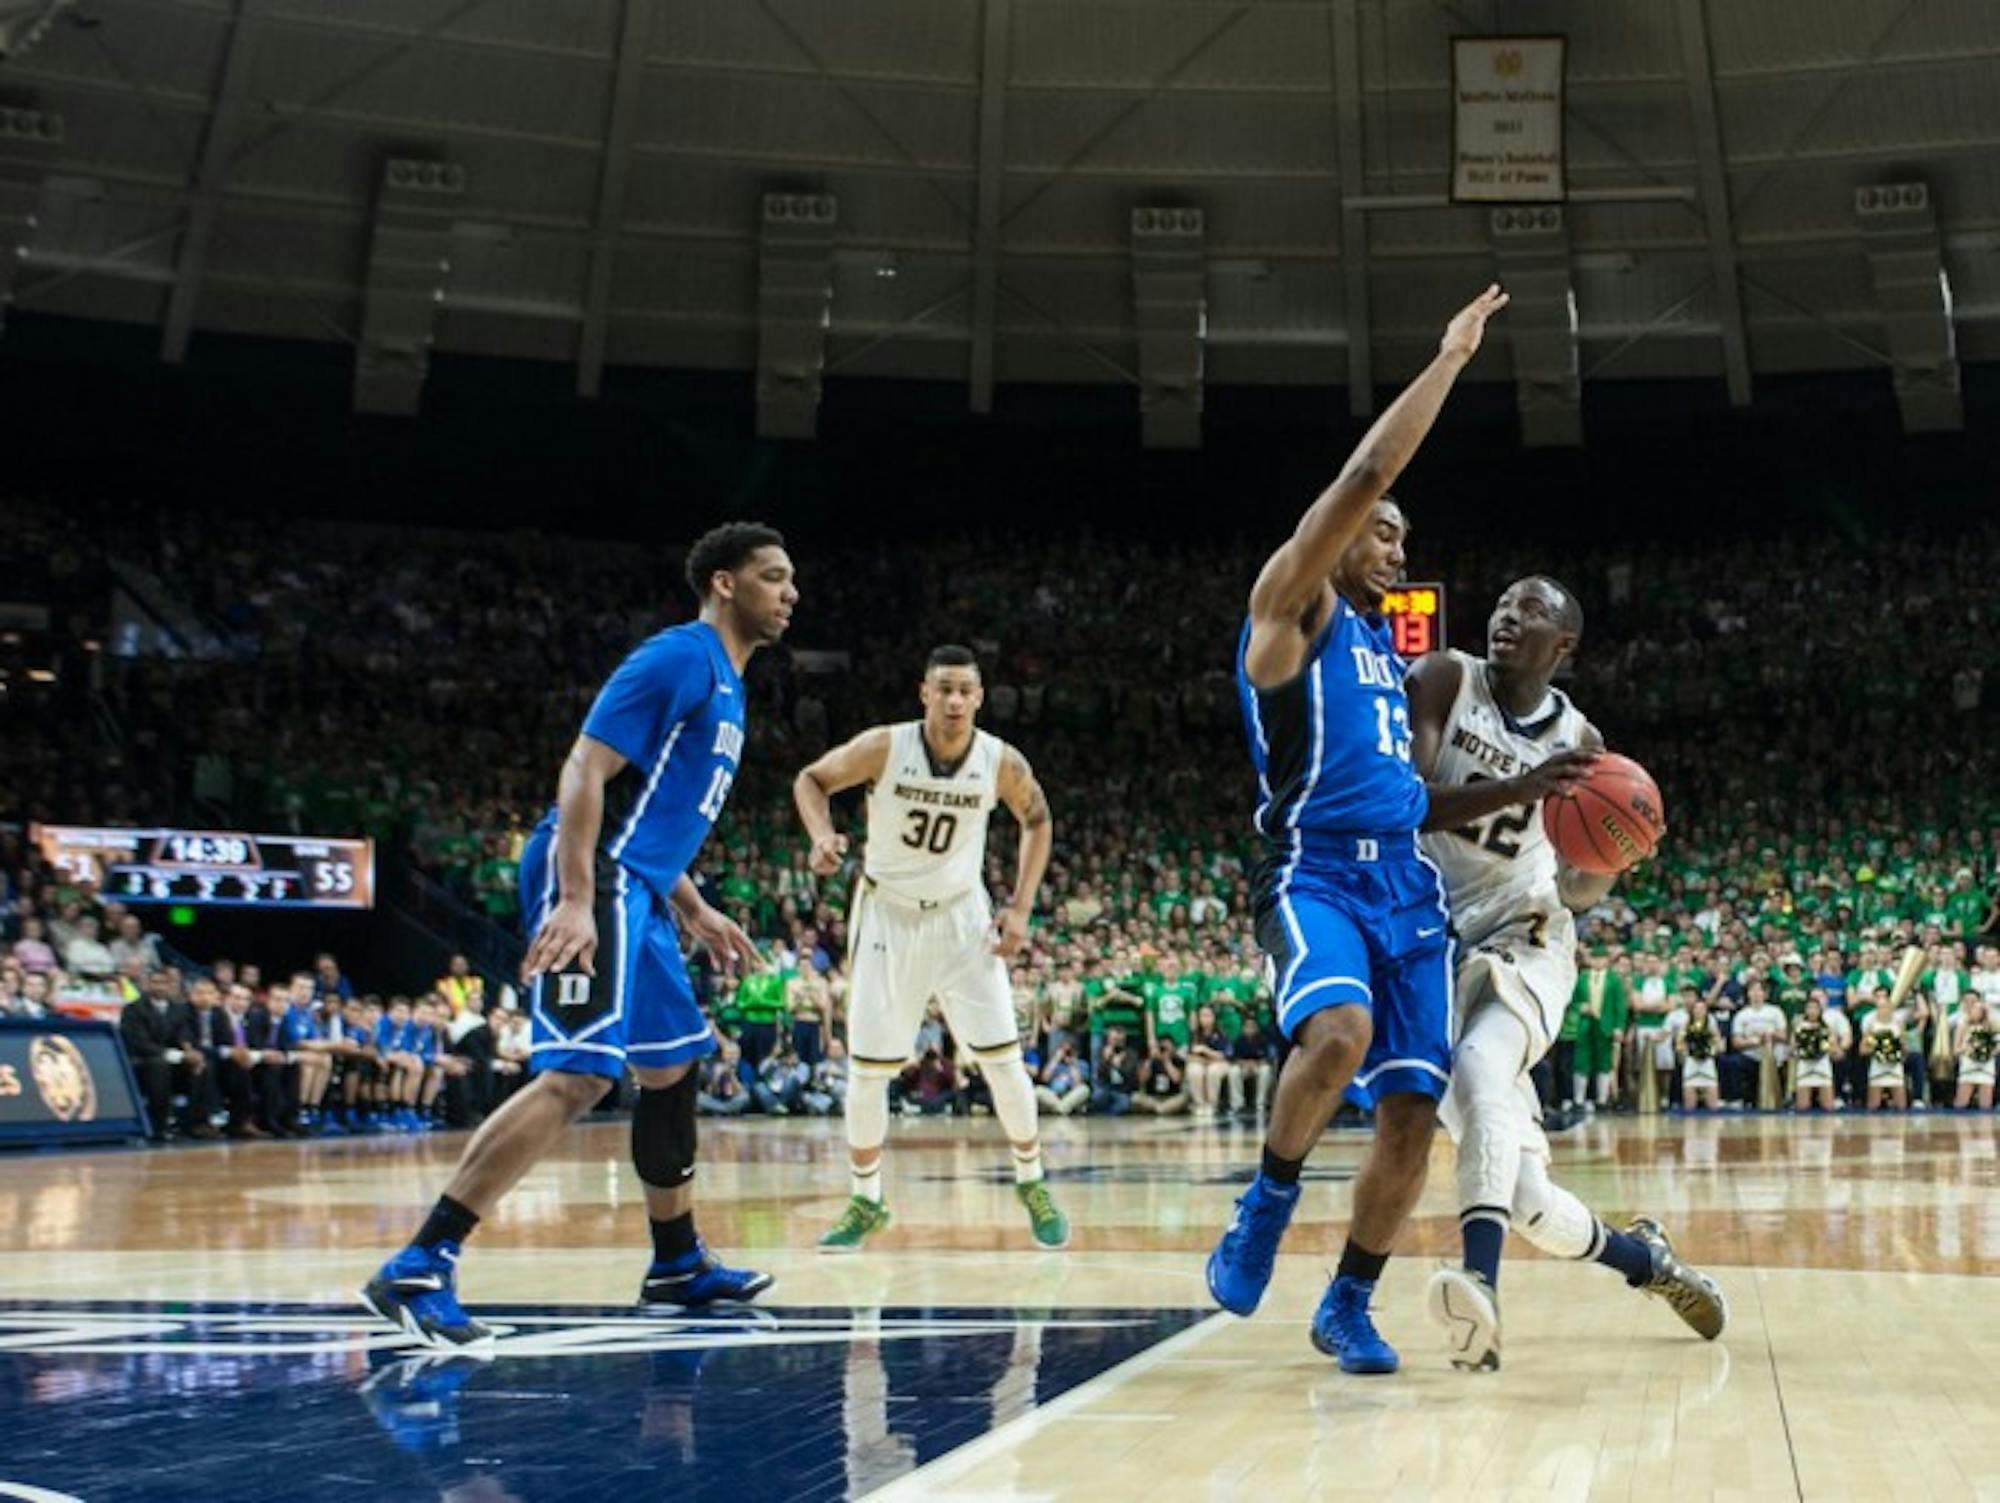 Irish senior guard Jerian Grant drives to the basket during Notre Dame's 77-73 win over Duke on Wednesday night at Purcell Pavilion.